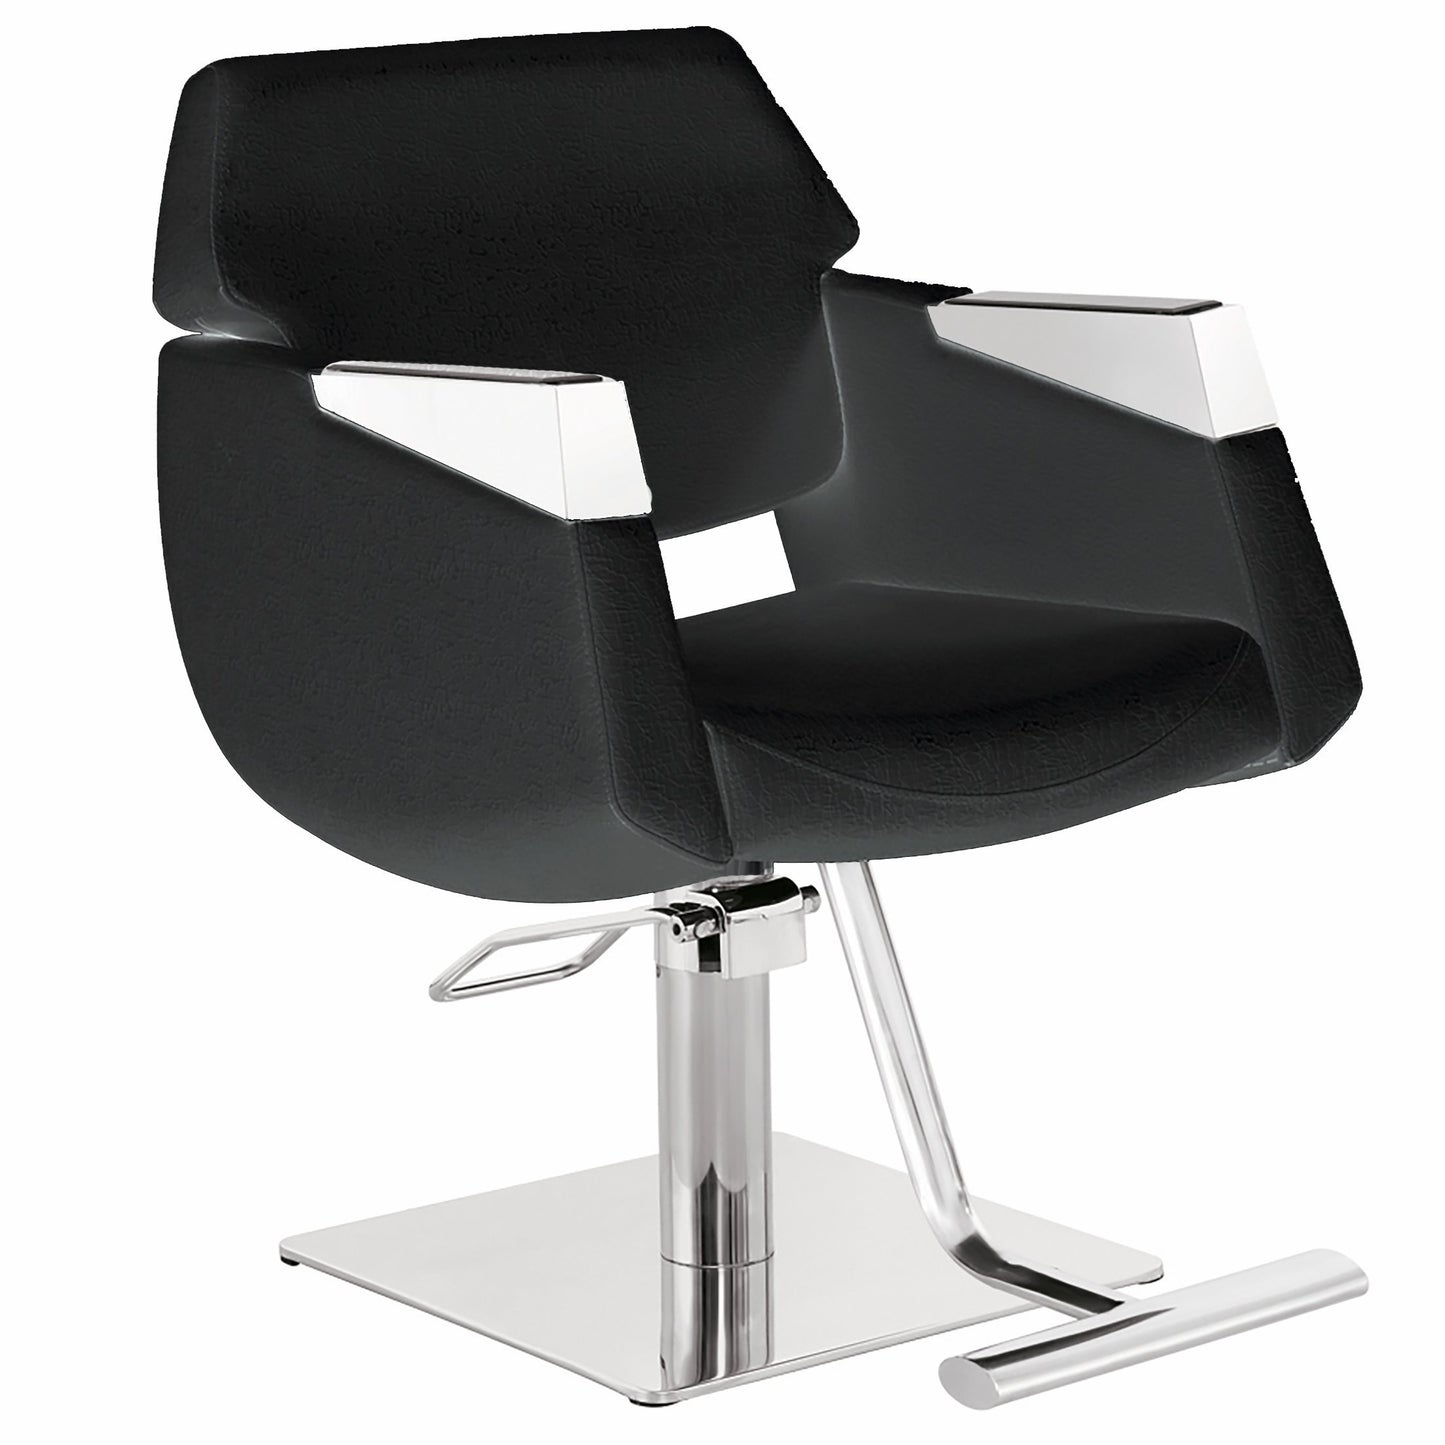 M-265 STYLING CHAIRS SSW 